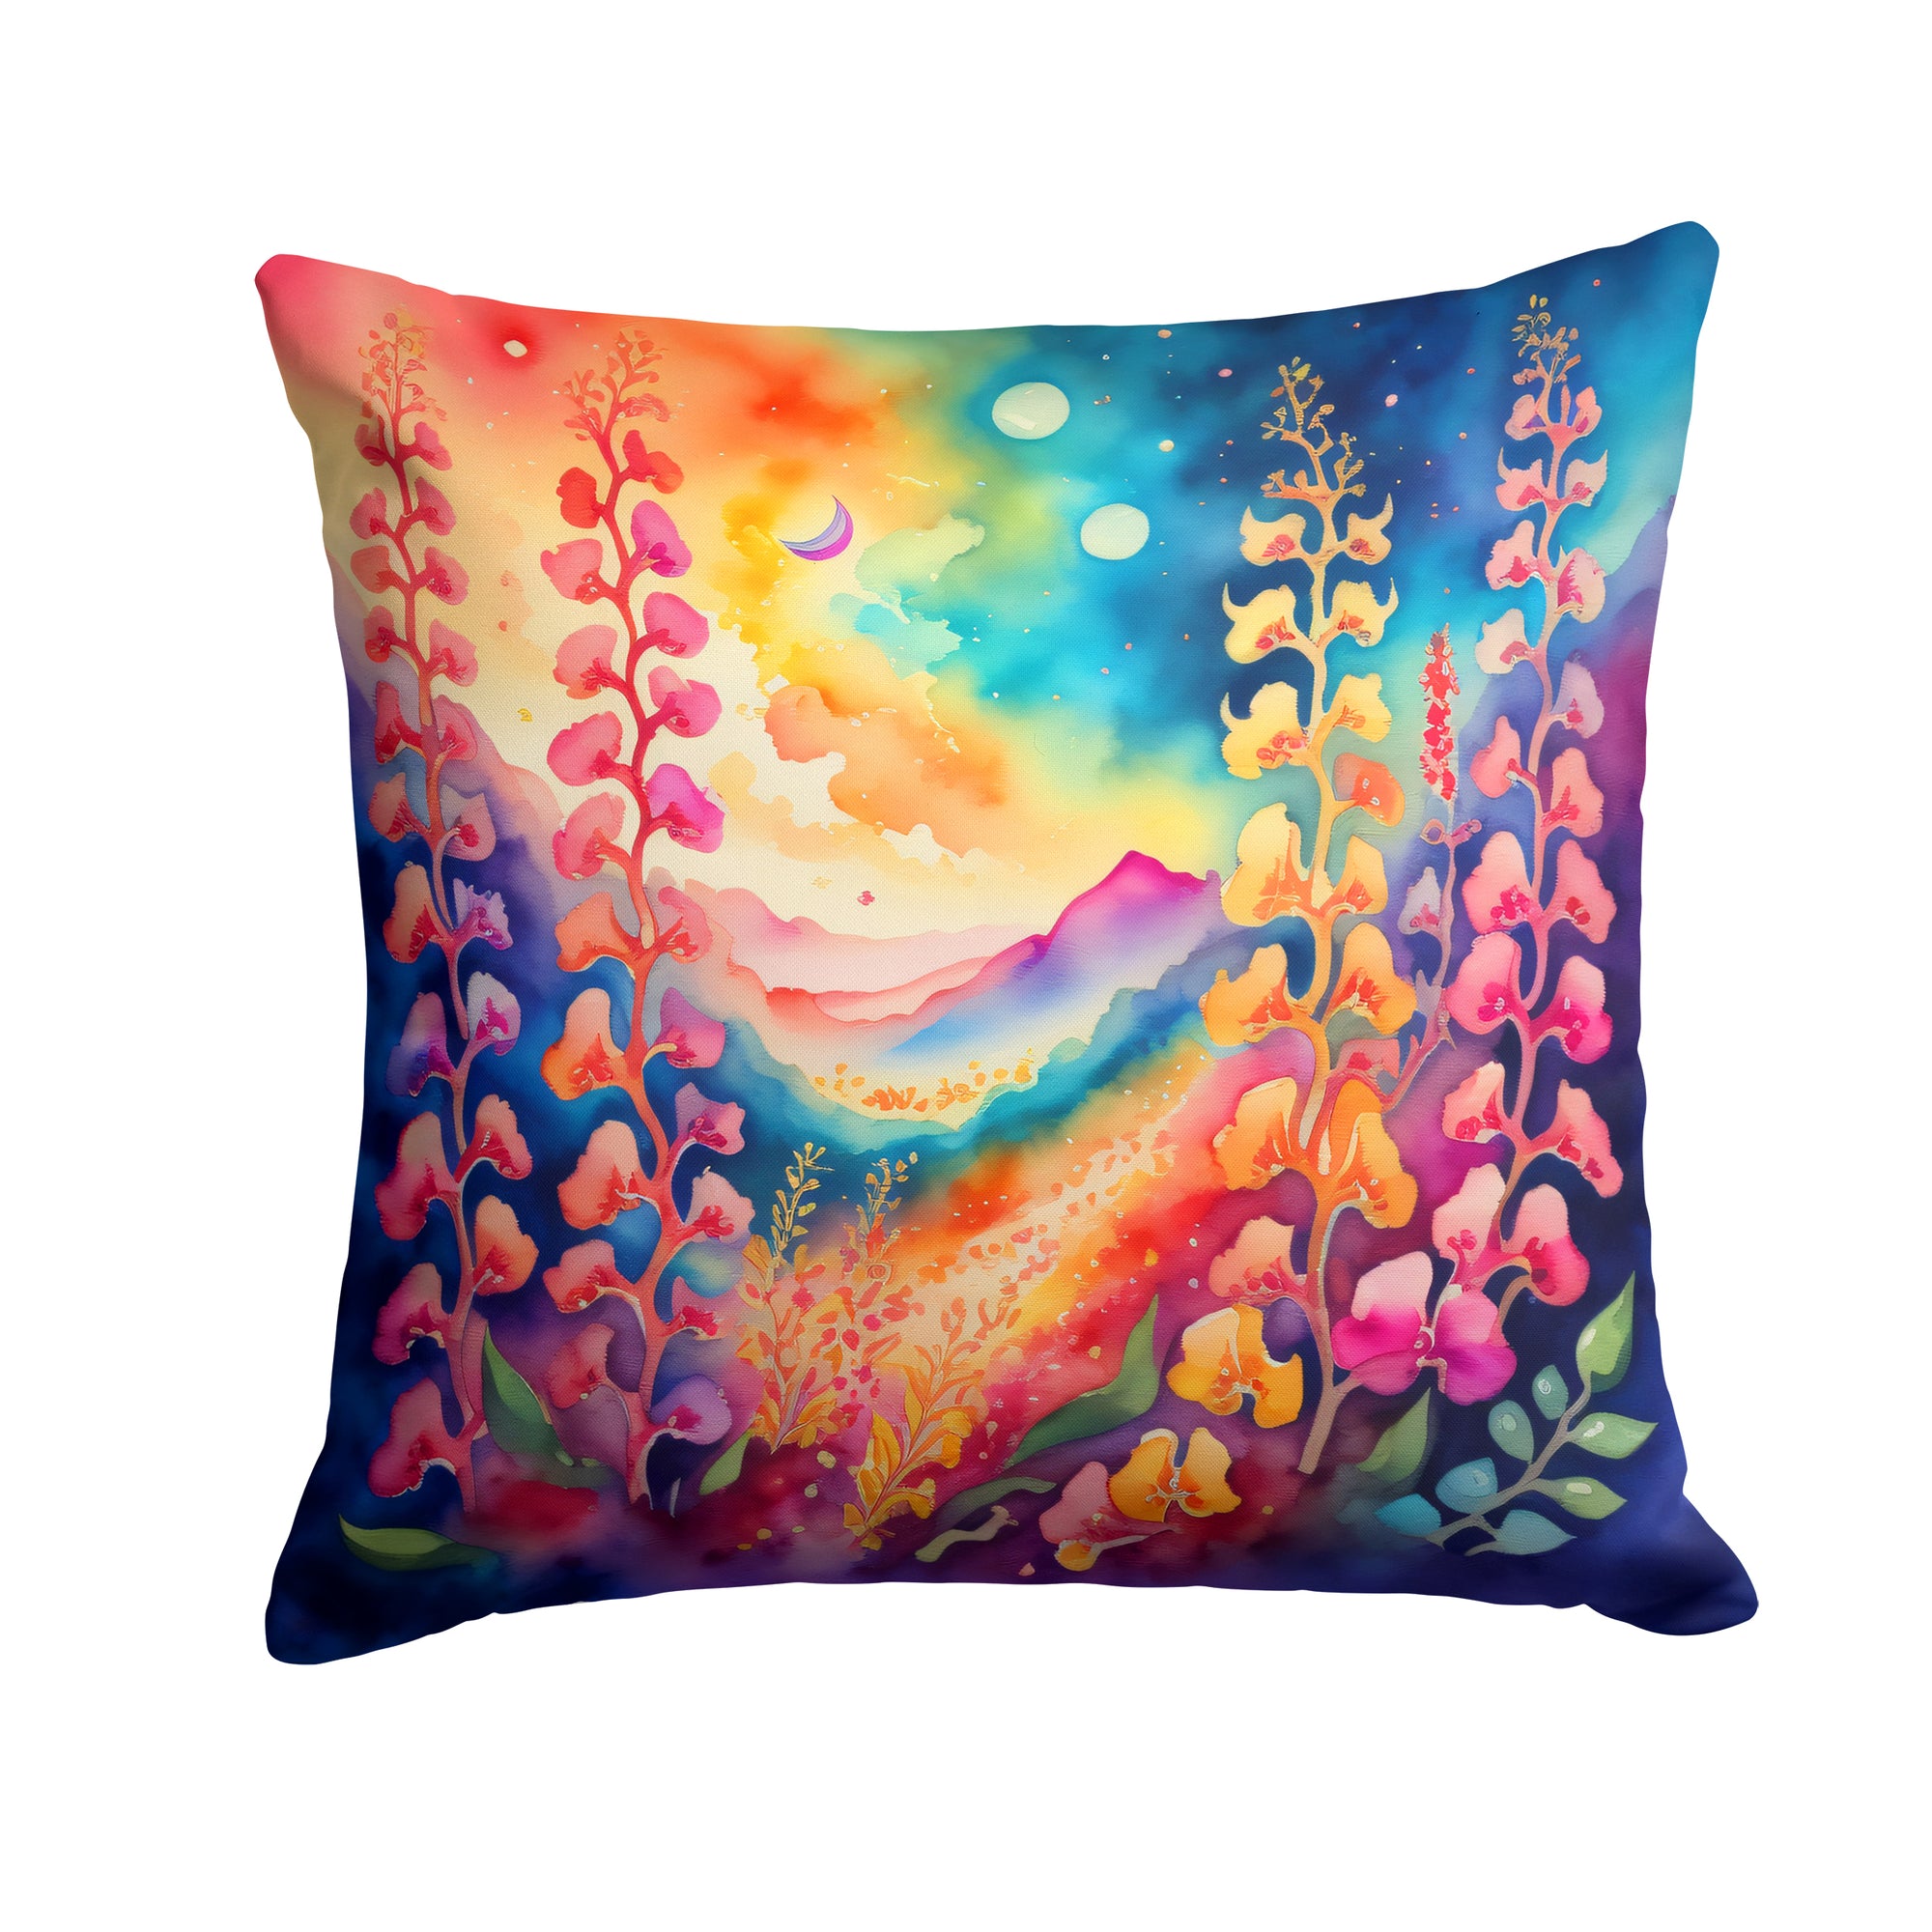 Buy this Colorful Snapdragon Fabric Decorative Pillow